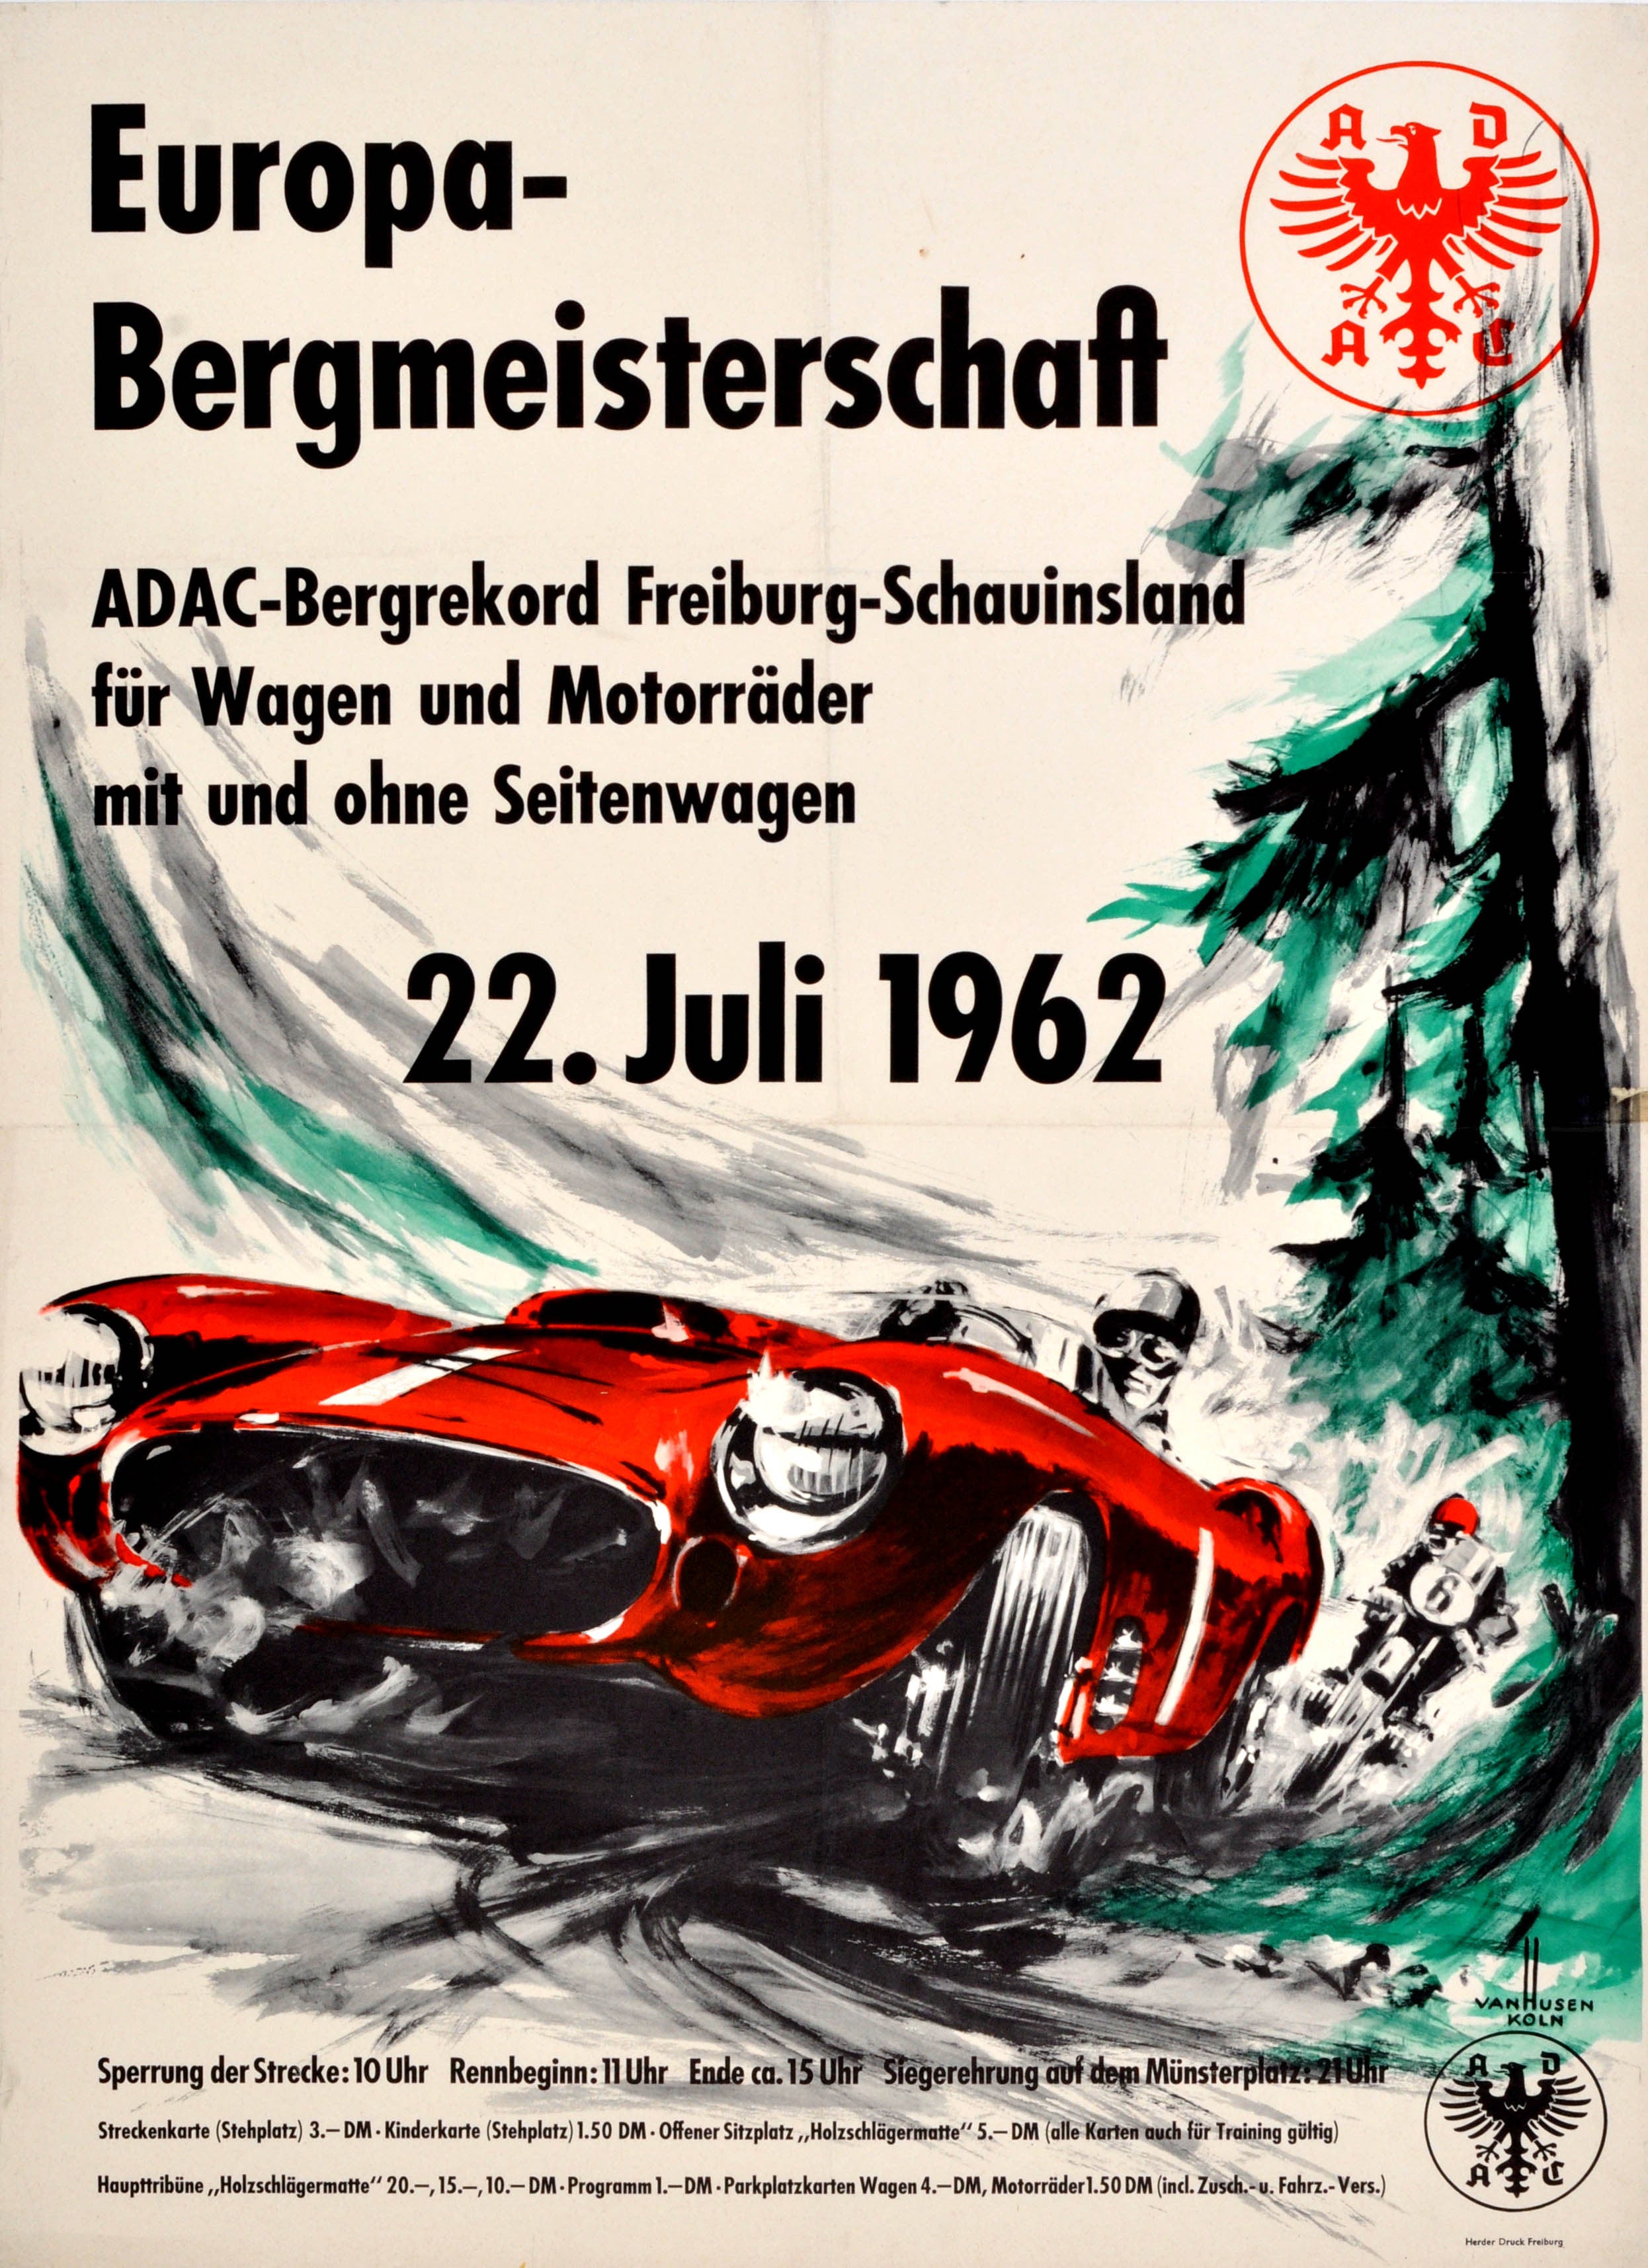 Original Vintage Car Racing Poster For The ADAC World Championships July 1962